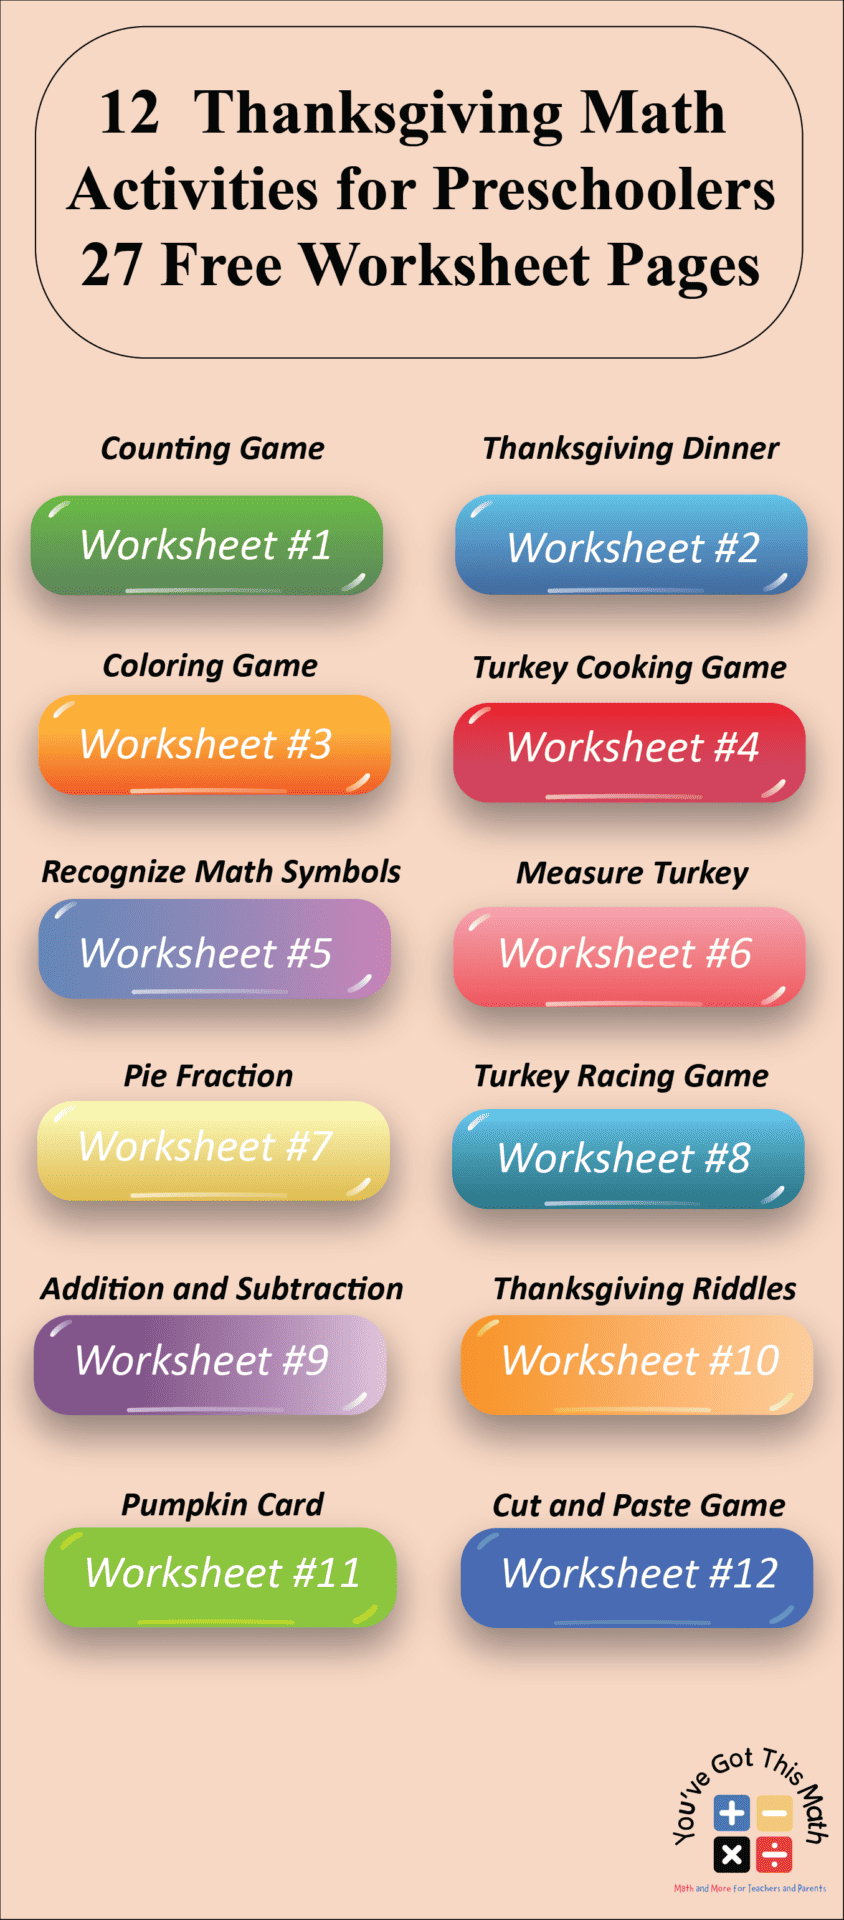 free-thanksgiving-math-activities-for-preschoolers-with-12-worksheets